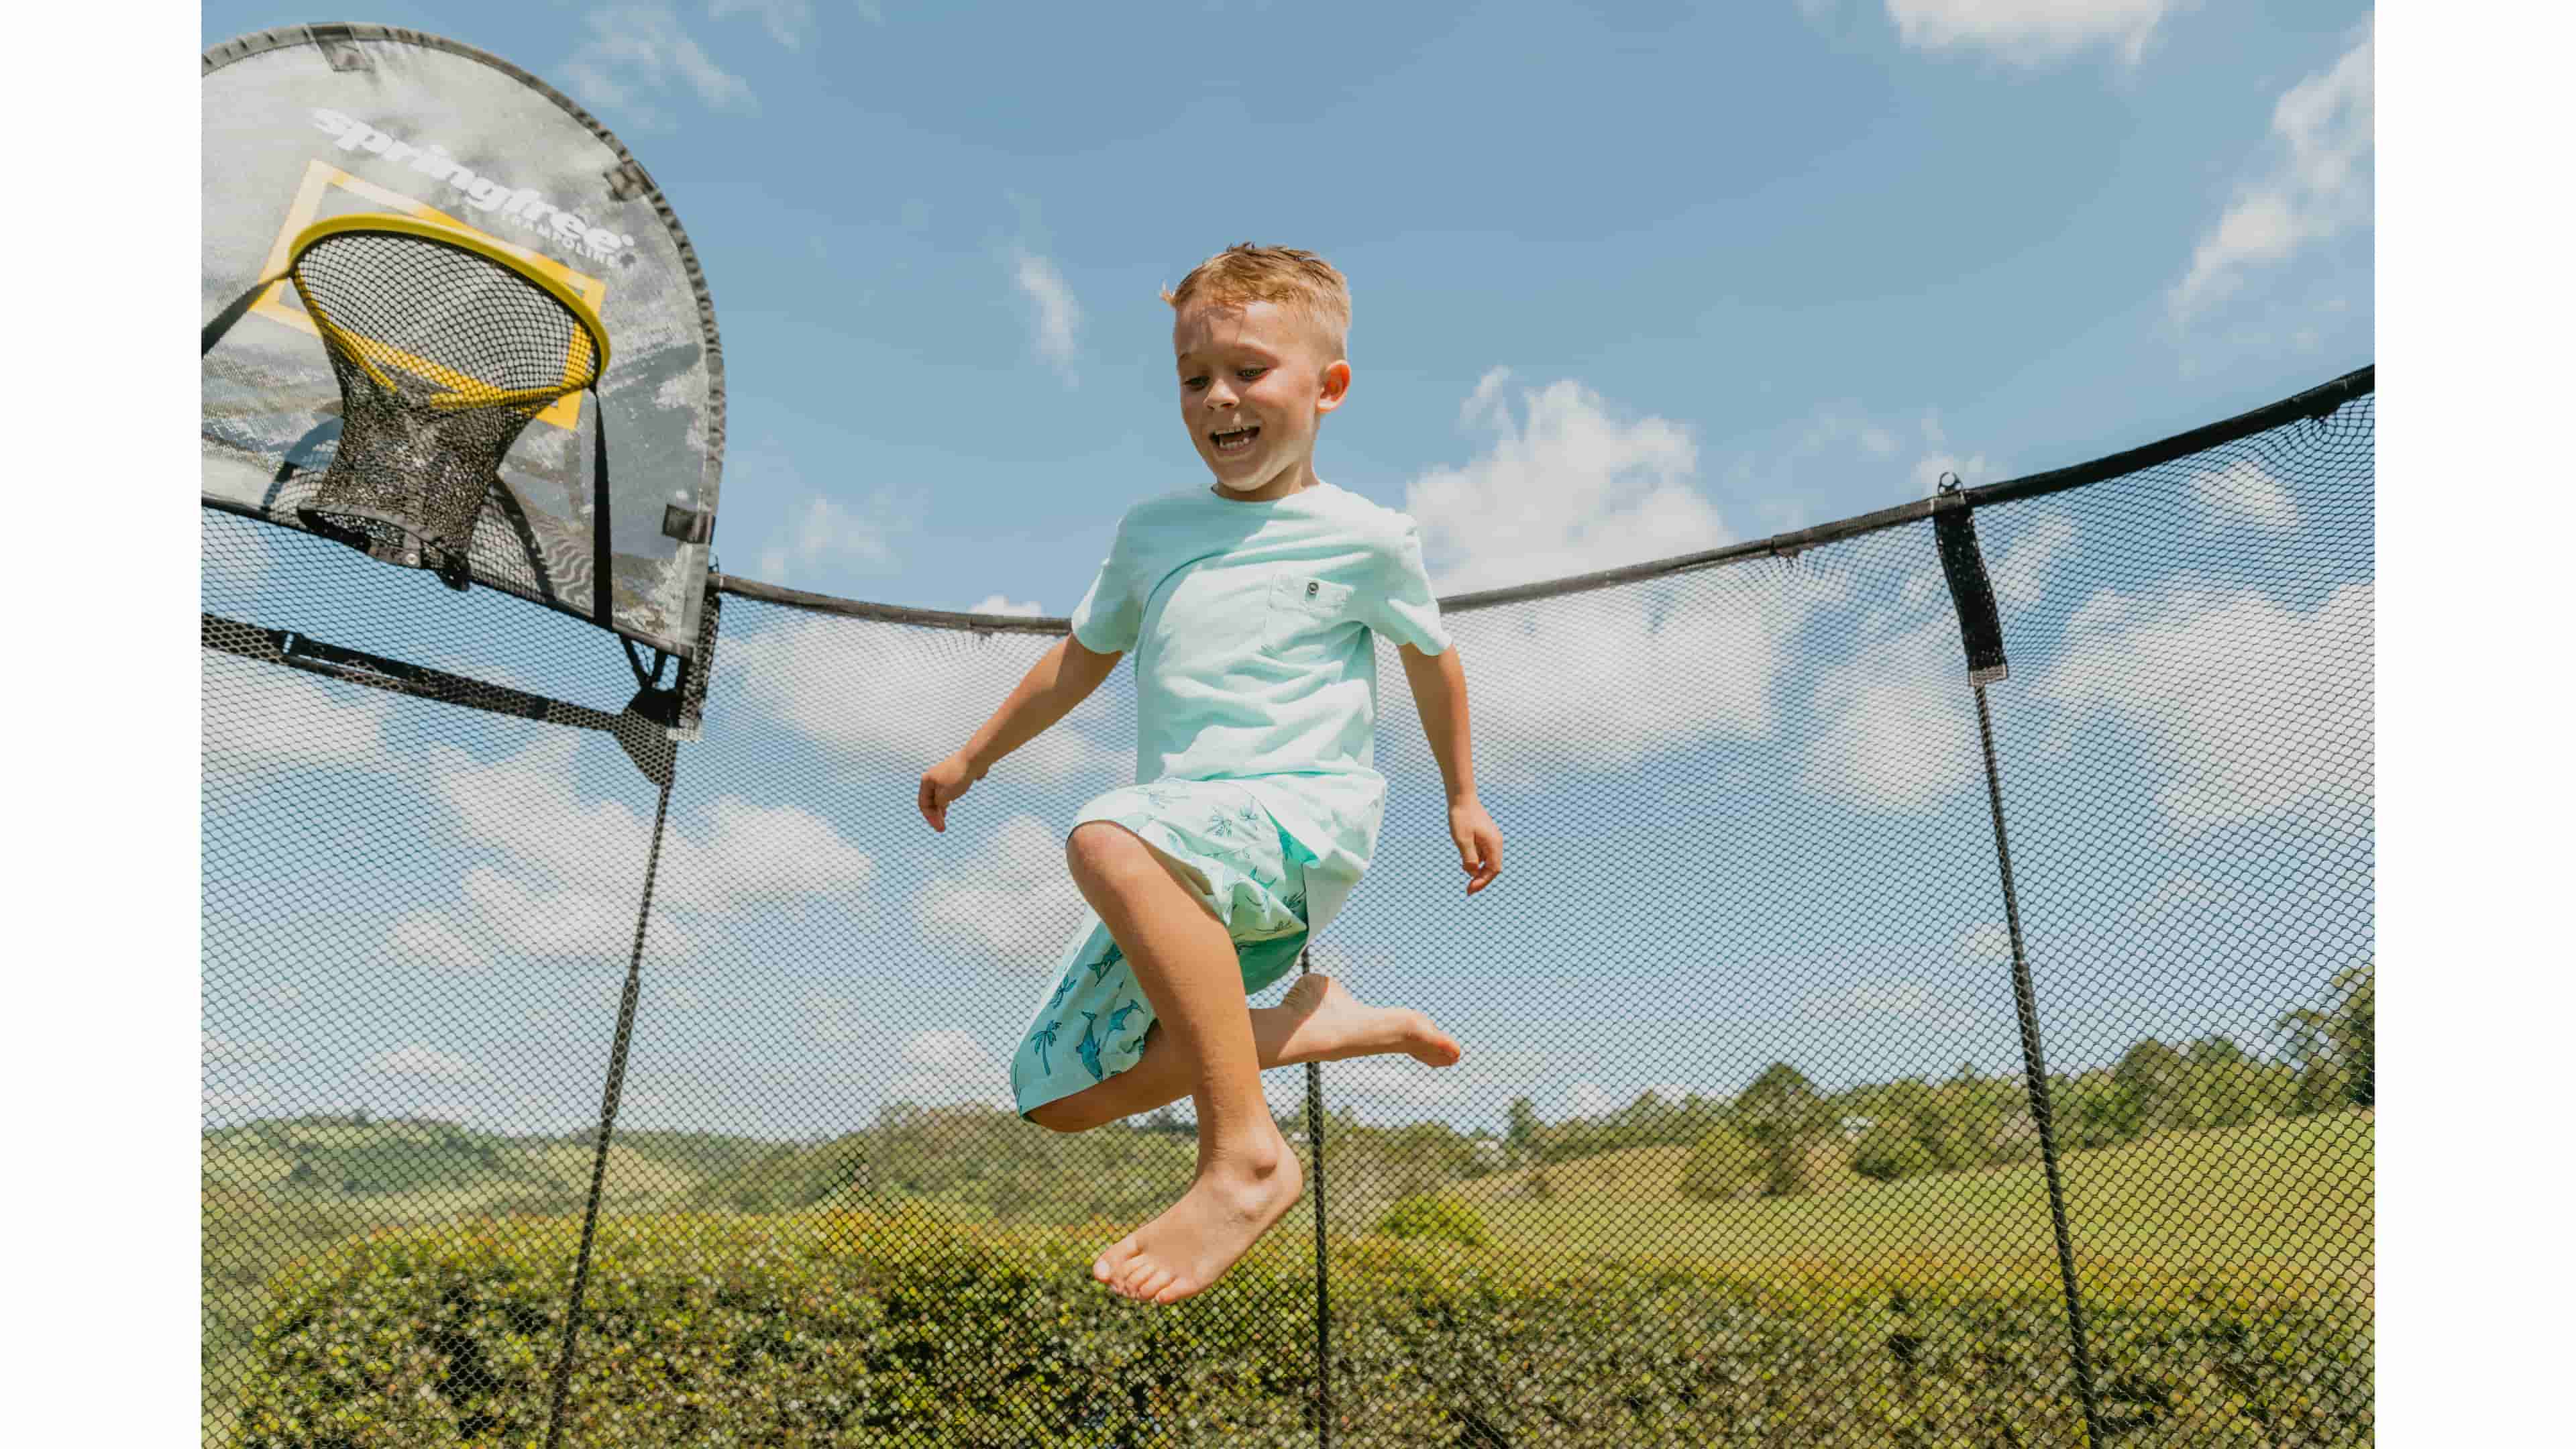 Upper Bounce Trampoline Accessories • See prices »